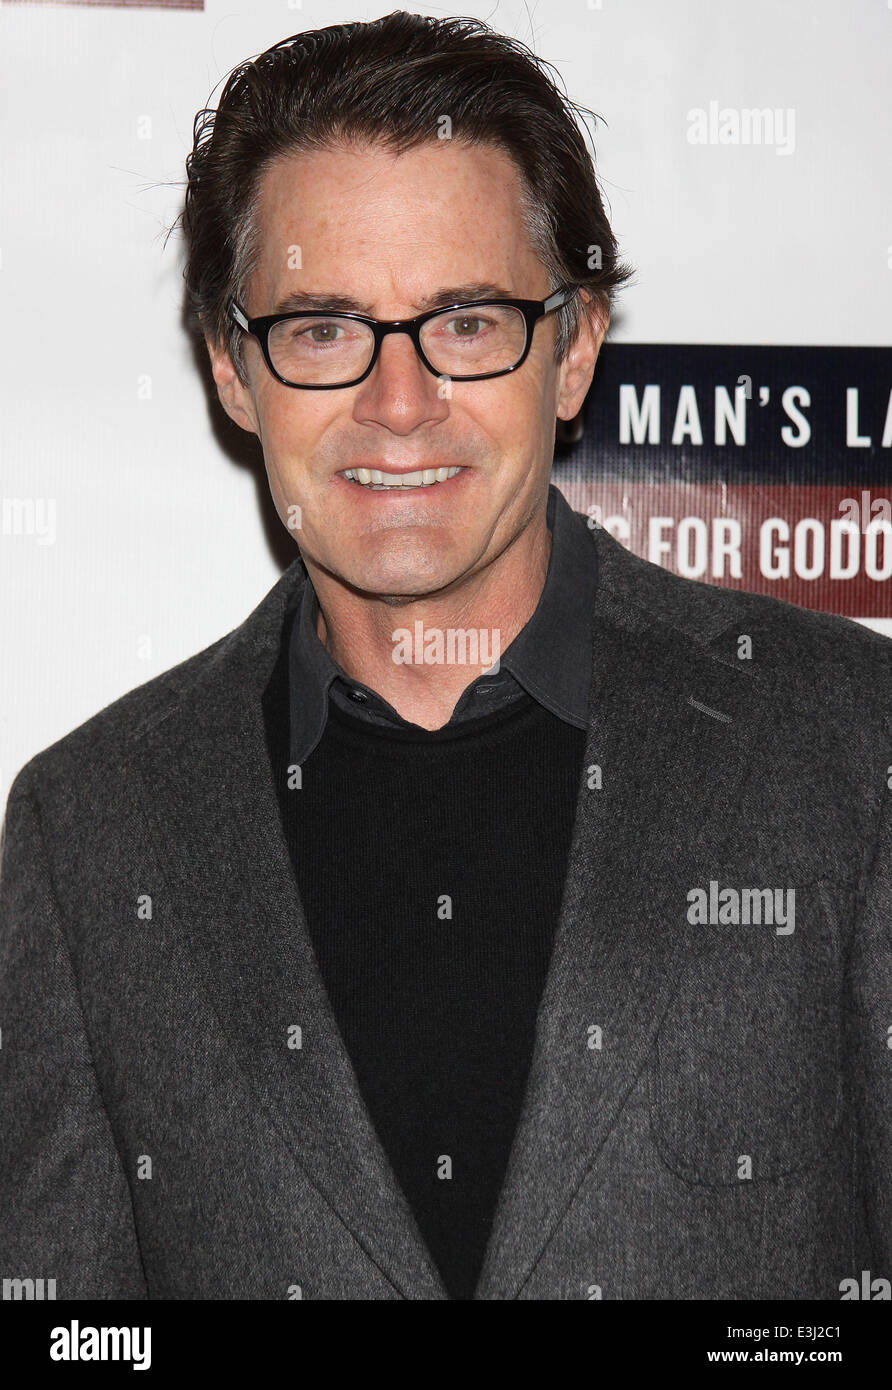 Opening Night for Broadway's Waiting For Godot at the Cort Theatre - Arrivals.  Featuring: Kyle Maclachlan Where: New York, New York, United States When: 24 Nov 2013 Stock Photo